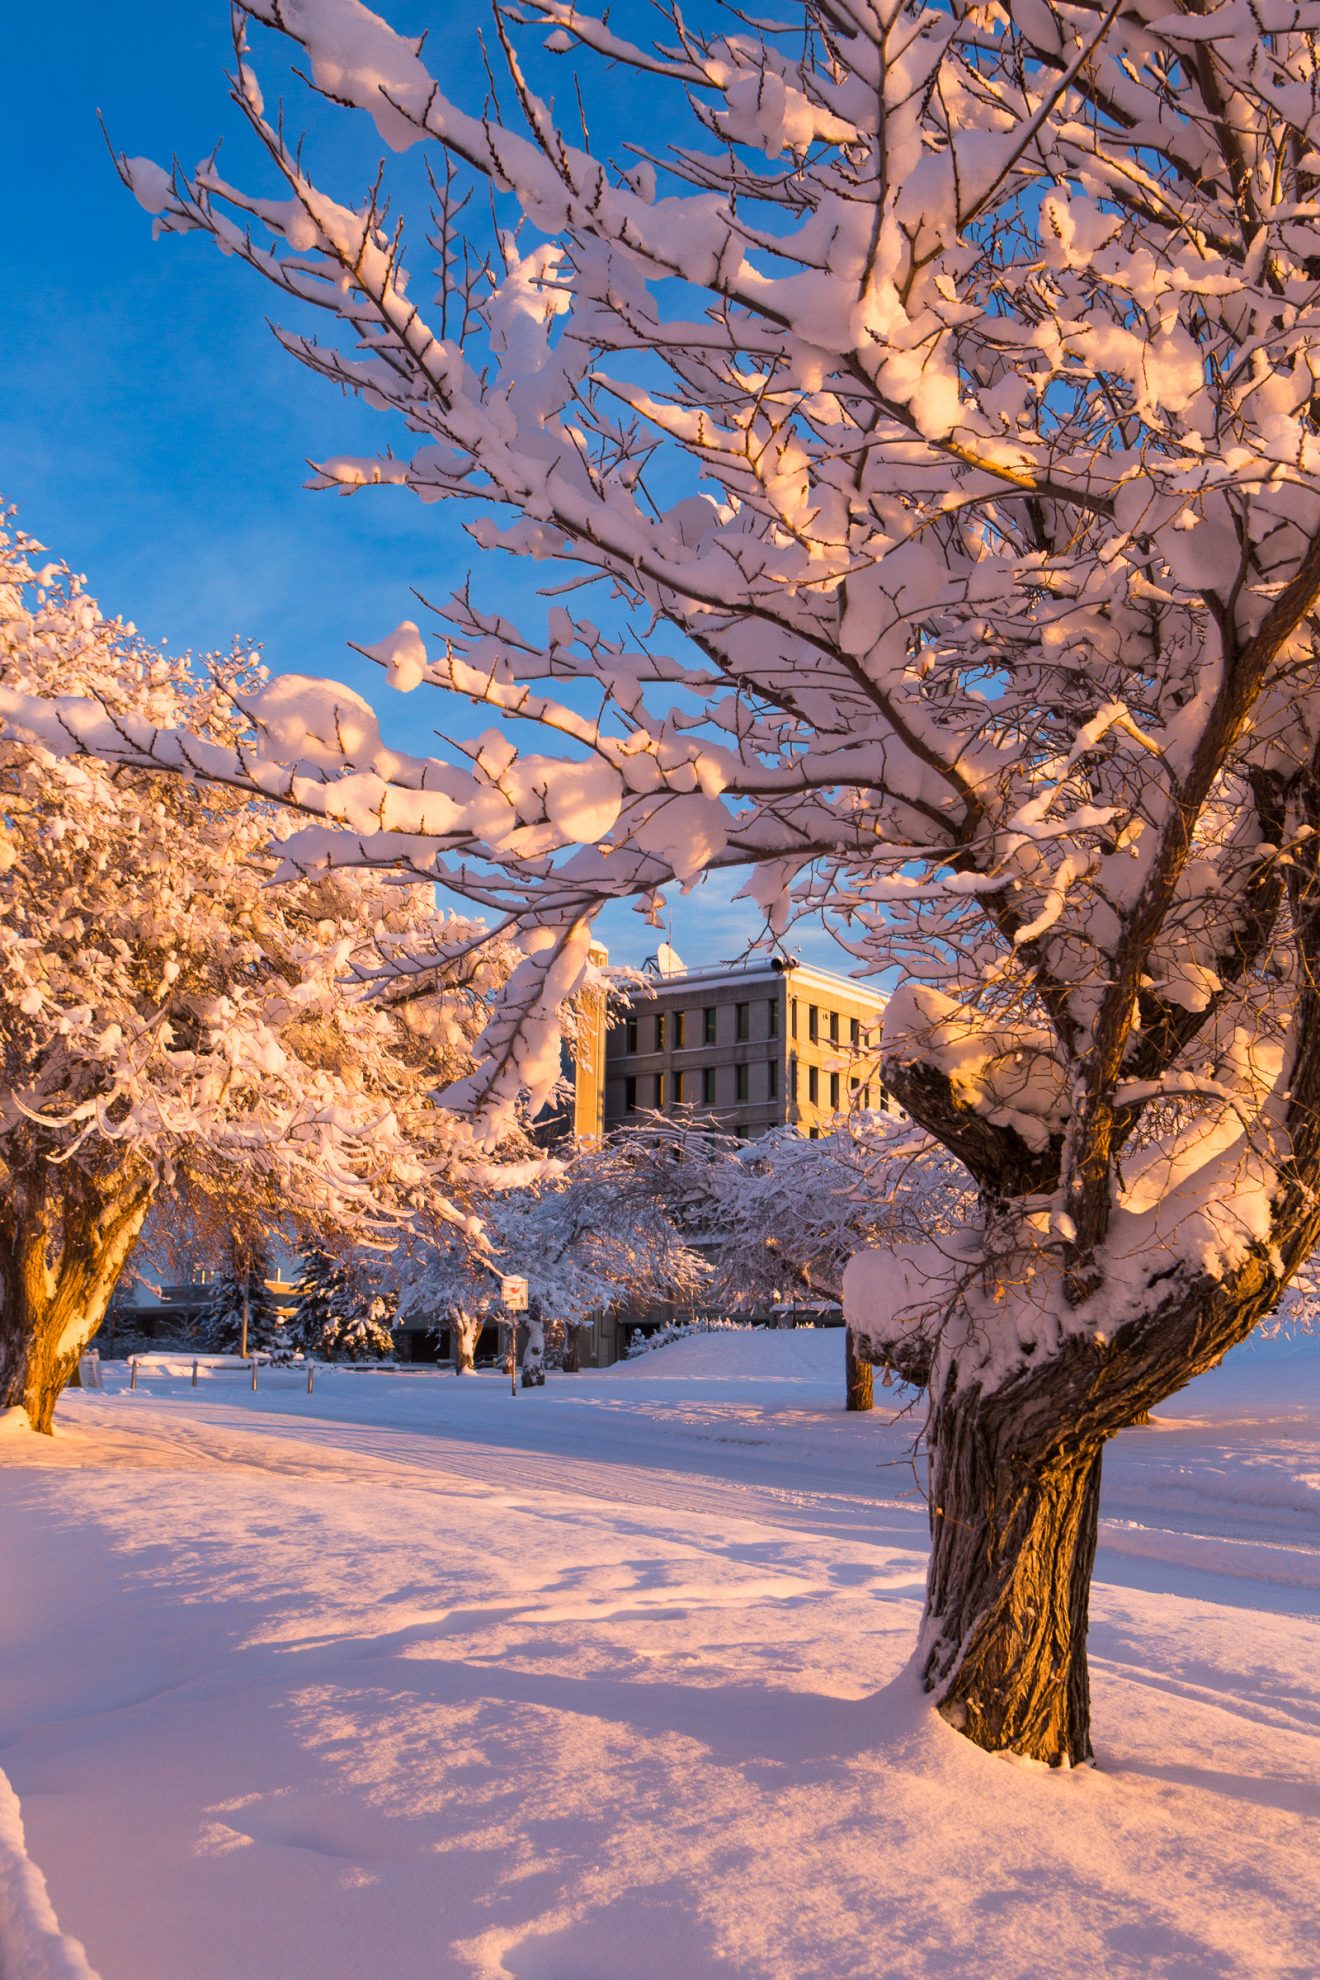 The winter light casts a warm glow across the Fairbanks campus on a December afternoon.